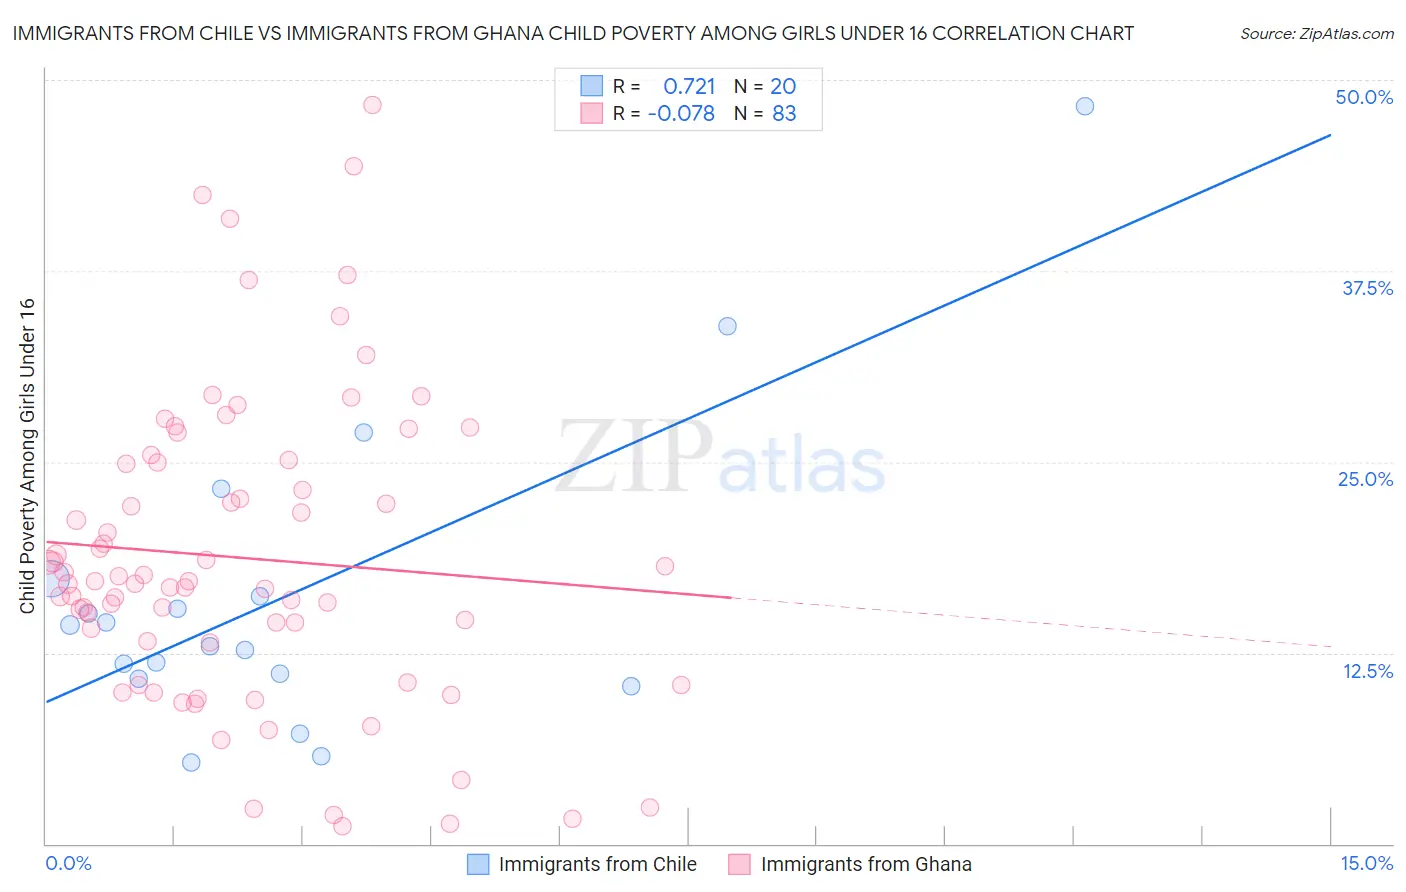 Immigrants from Chile vs Immigrants from Ghana Child Poverty Among Girls Under 16